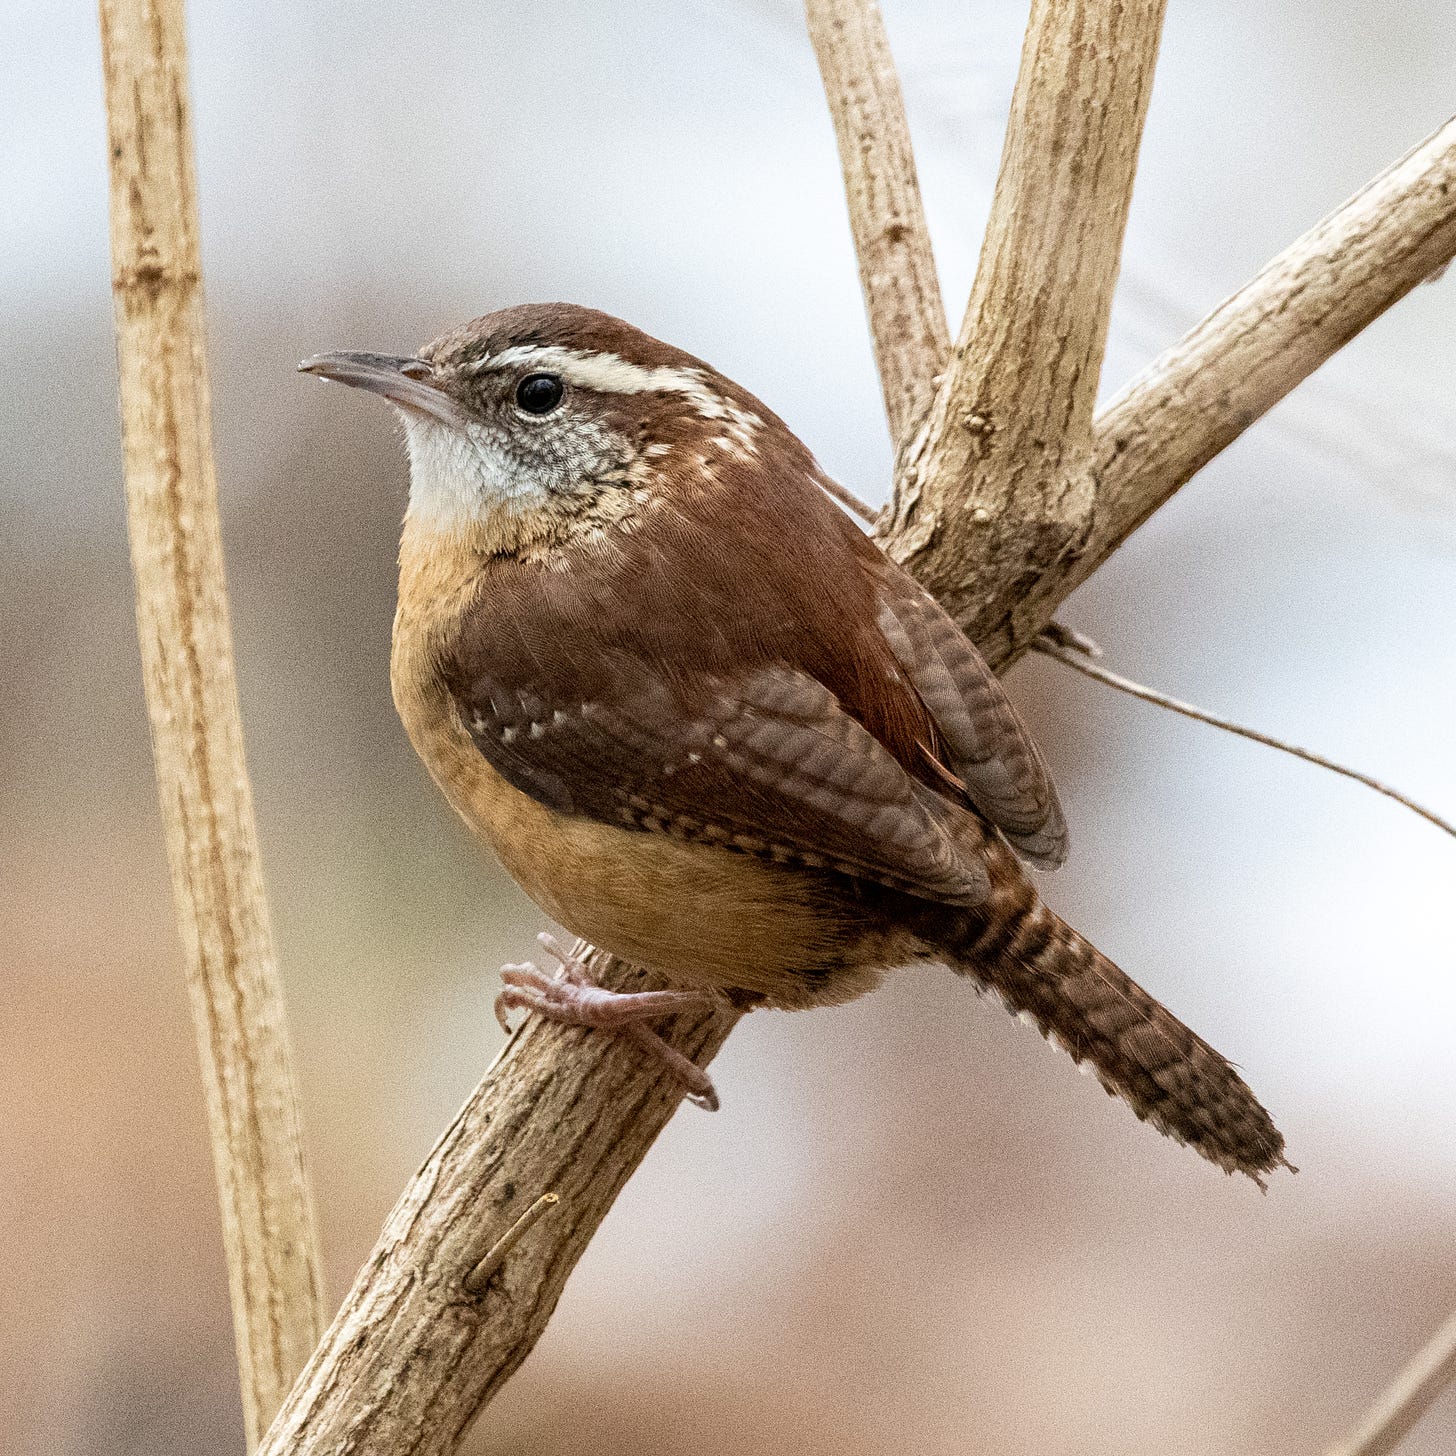 A close-up of a Carolina wren in profile, with its bold white supercilium and its barred wings and tail visible